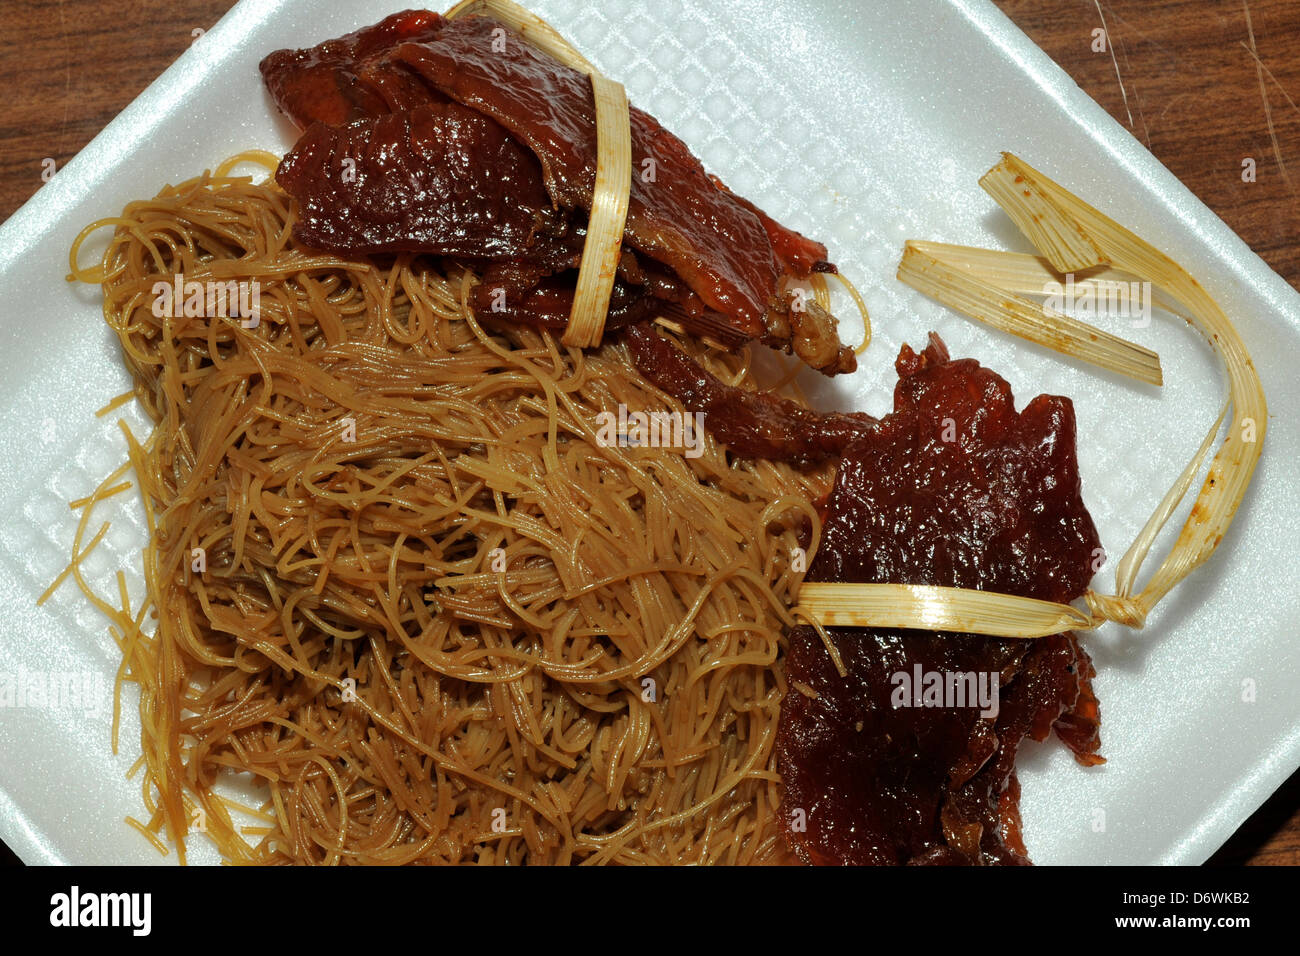 Thailand, Khon kaen, Thai stir fried noodles with barbeque pork, popular take-away snack from street food vendors Stock Photo